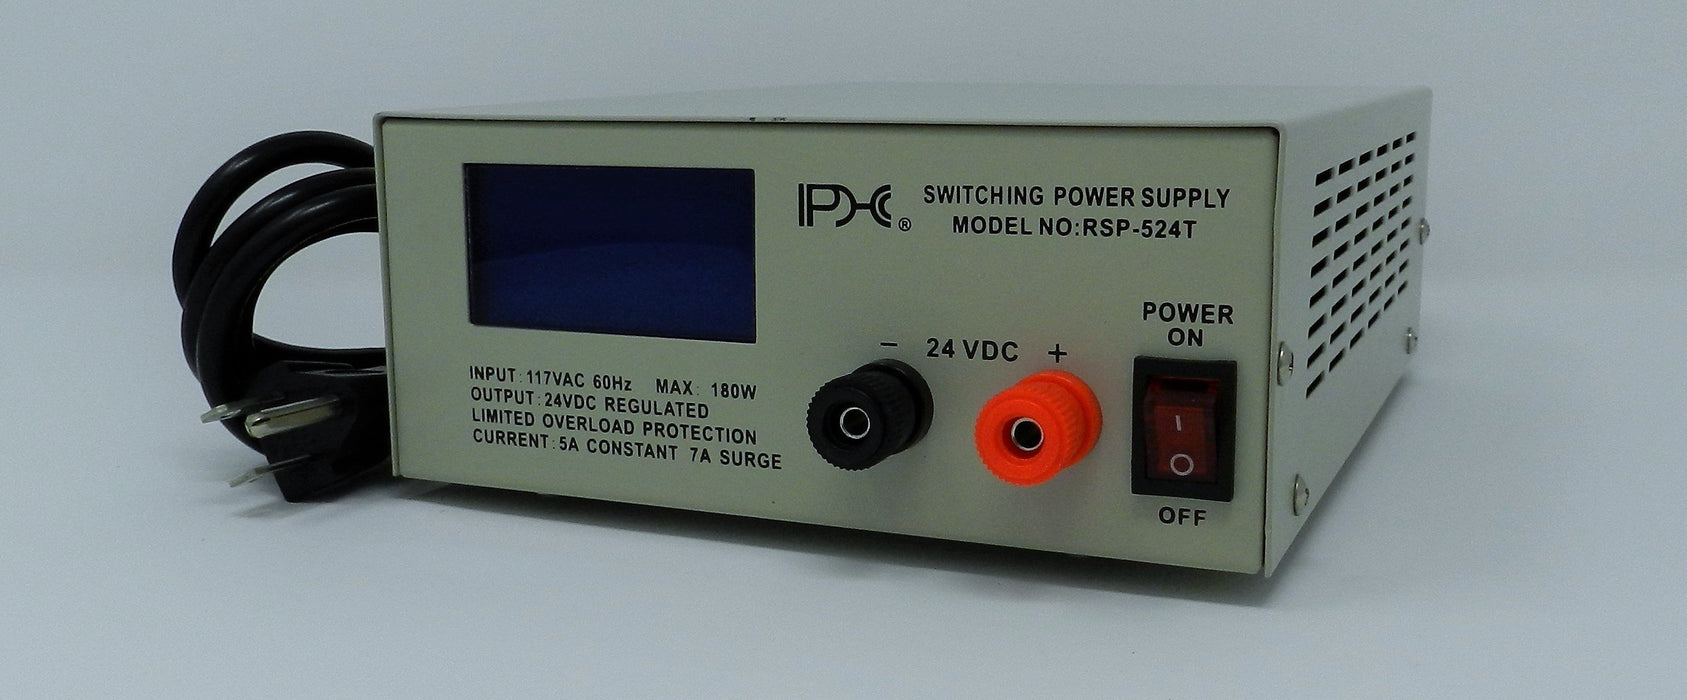 24VDC @ 5A DC Regulated Switching Power Supply; Part # RSP-524T - AC-DC PowerShack